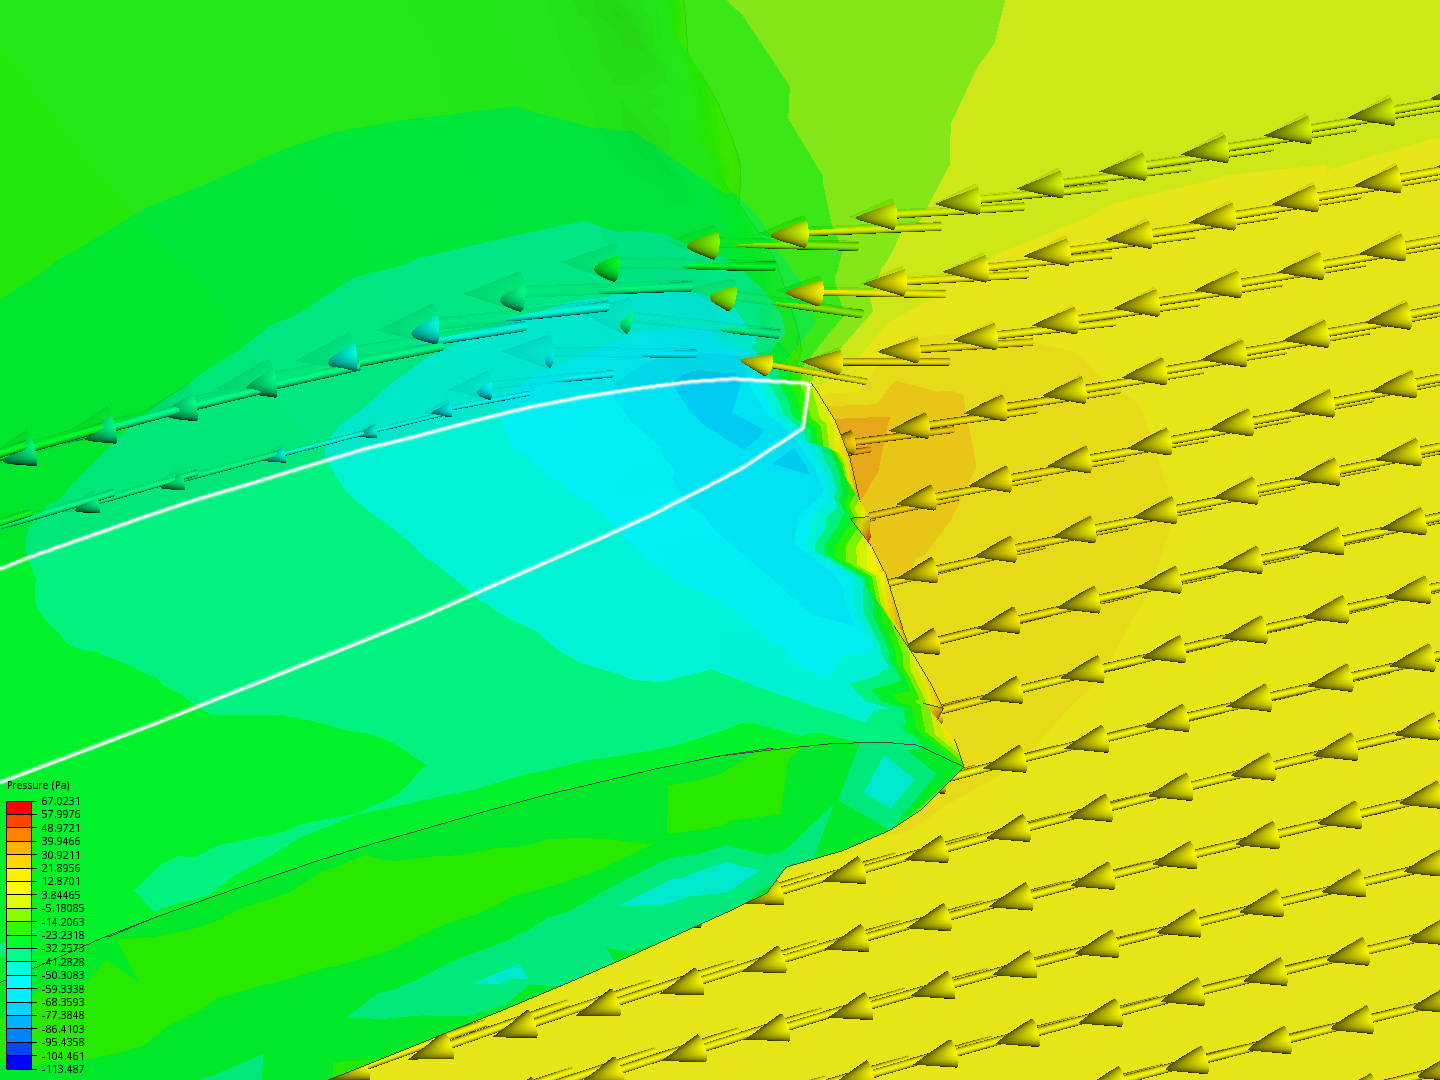 CFD Wing Prototype image